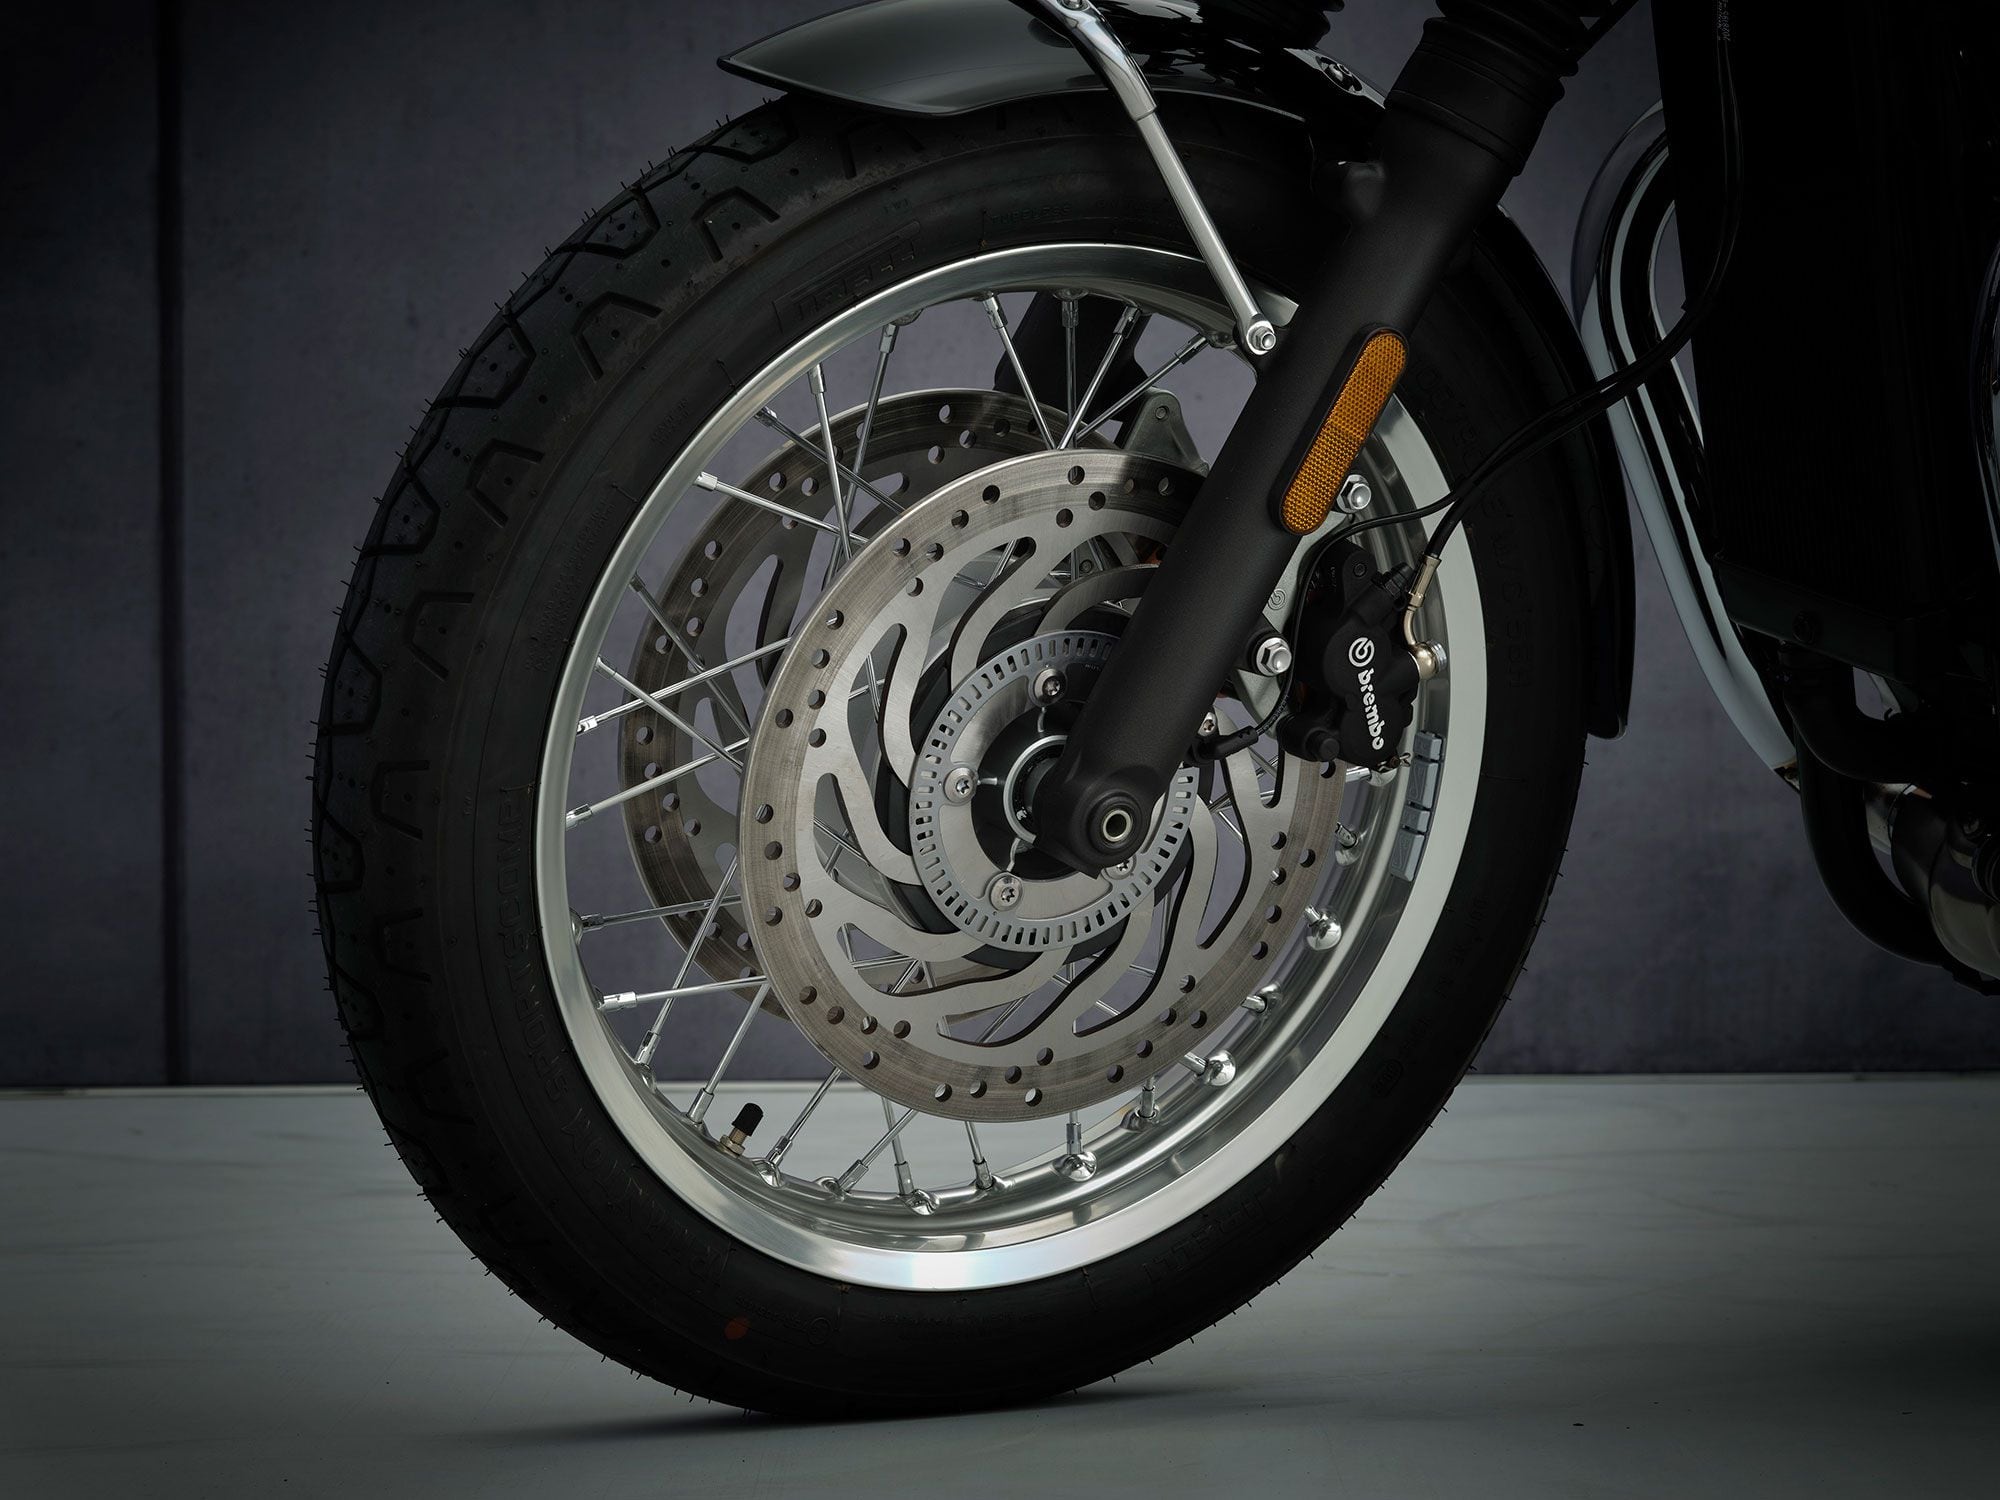 The twin discs are unchanged, but new Brembo calipers improve stopping performance.